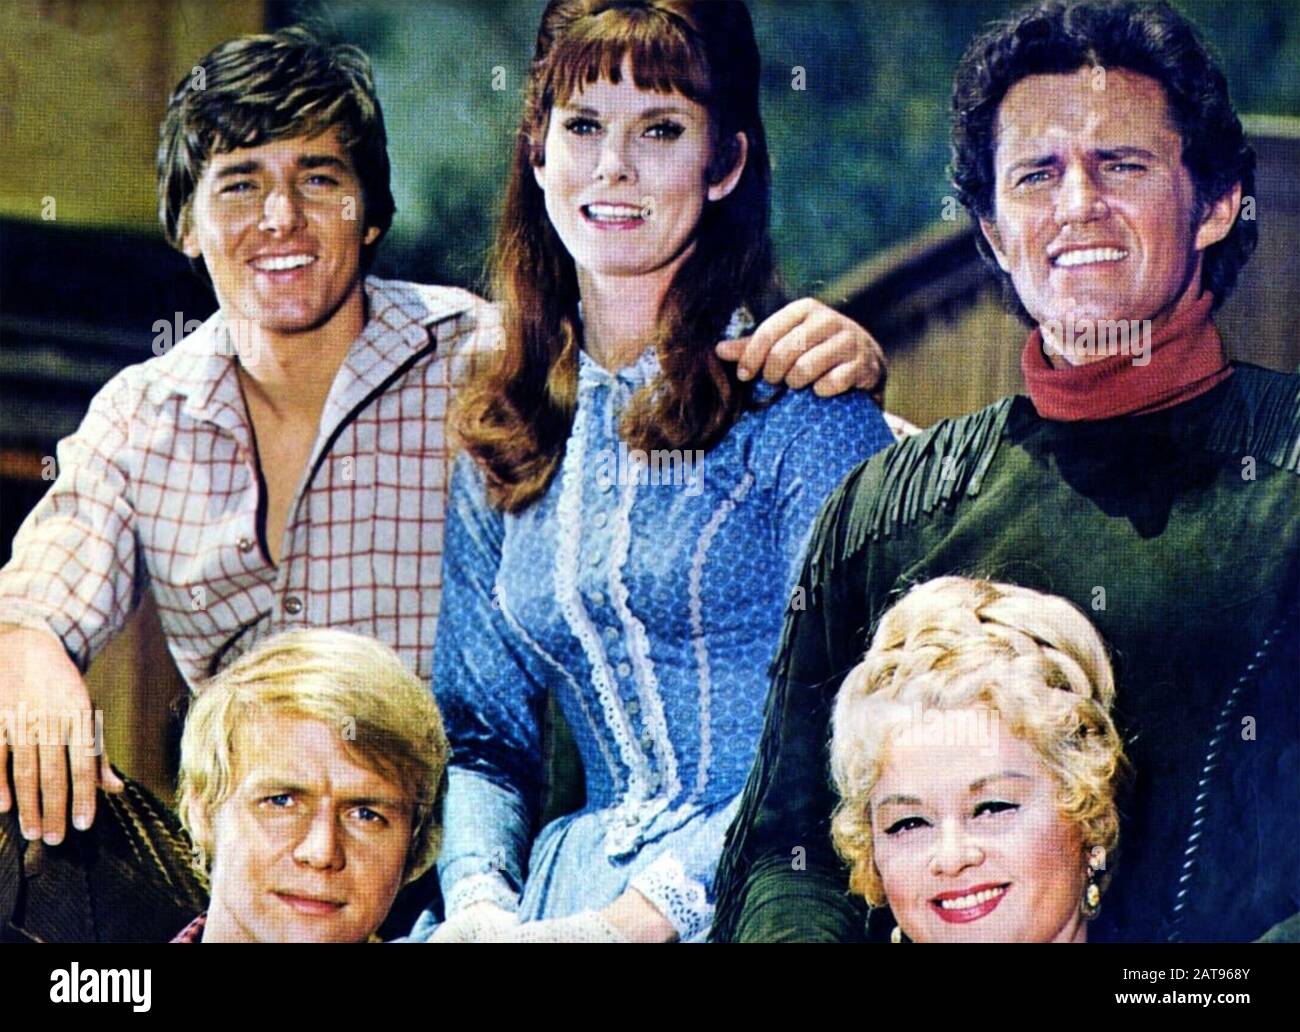 HERE COME THE BRIDES Screen Gems/Sony Pictures Television comedy Western TV series 1968-1970. From left: Bobby Sherman, David Soul, Bridget Hanley, Joan Blondell, Robert Brown Stock Photo